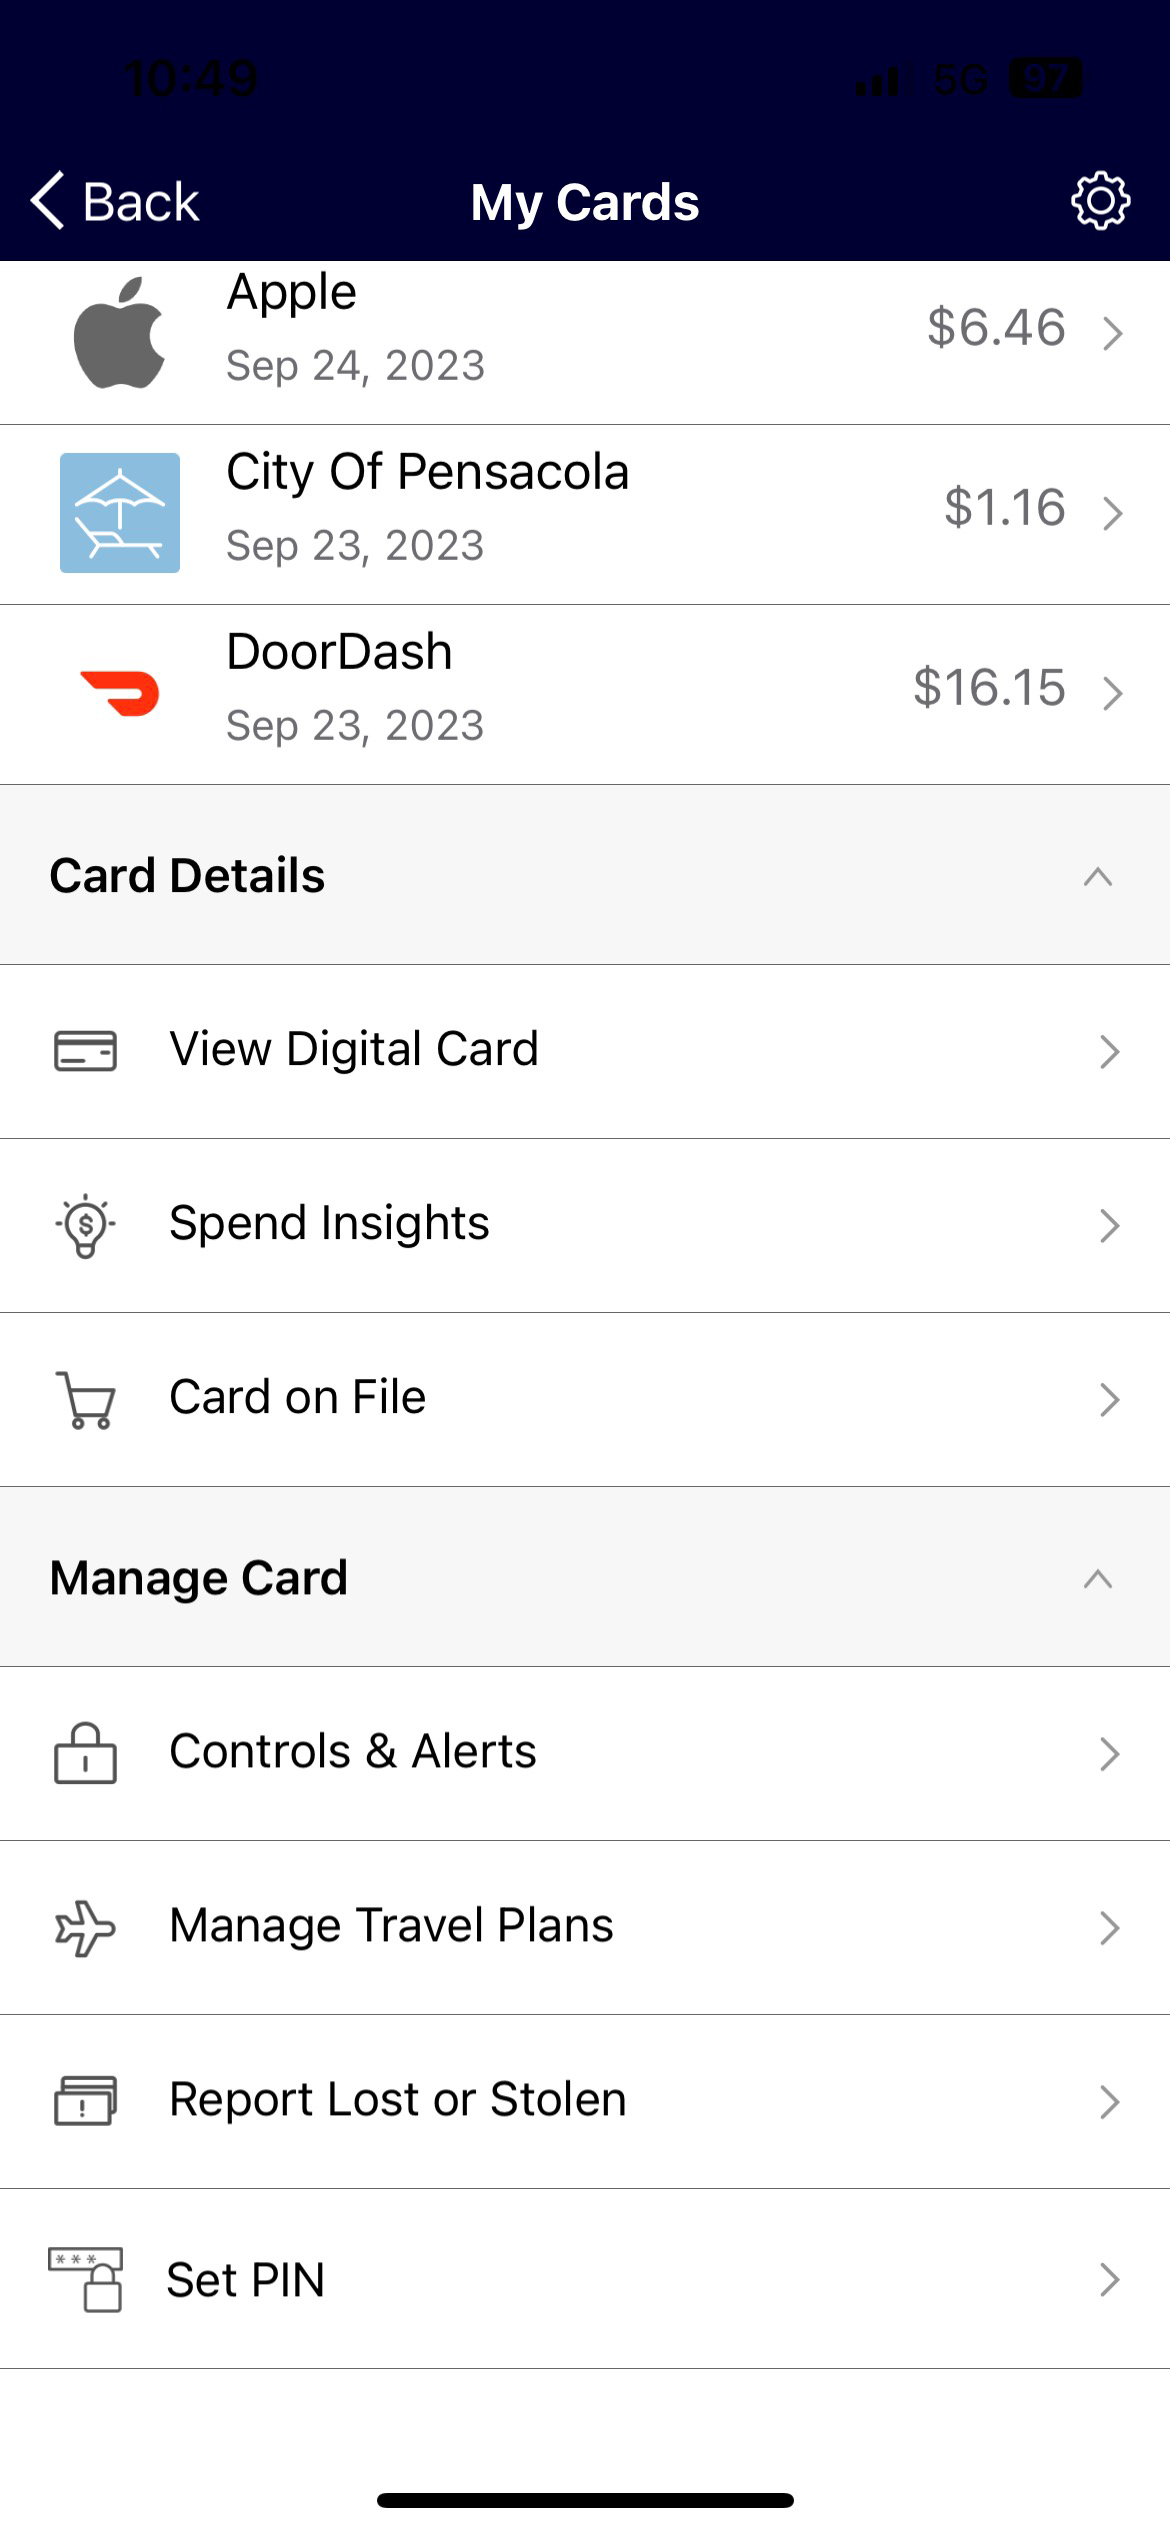 my cards on mobile banking